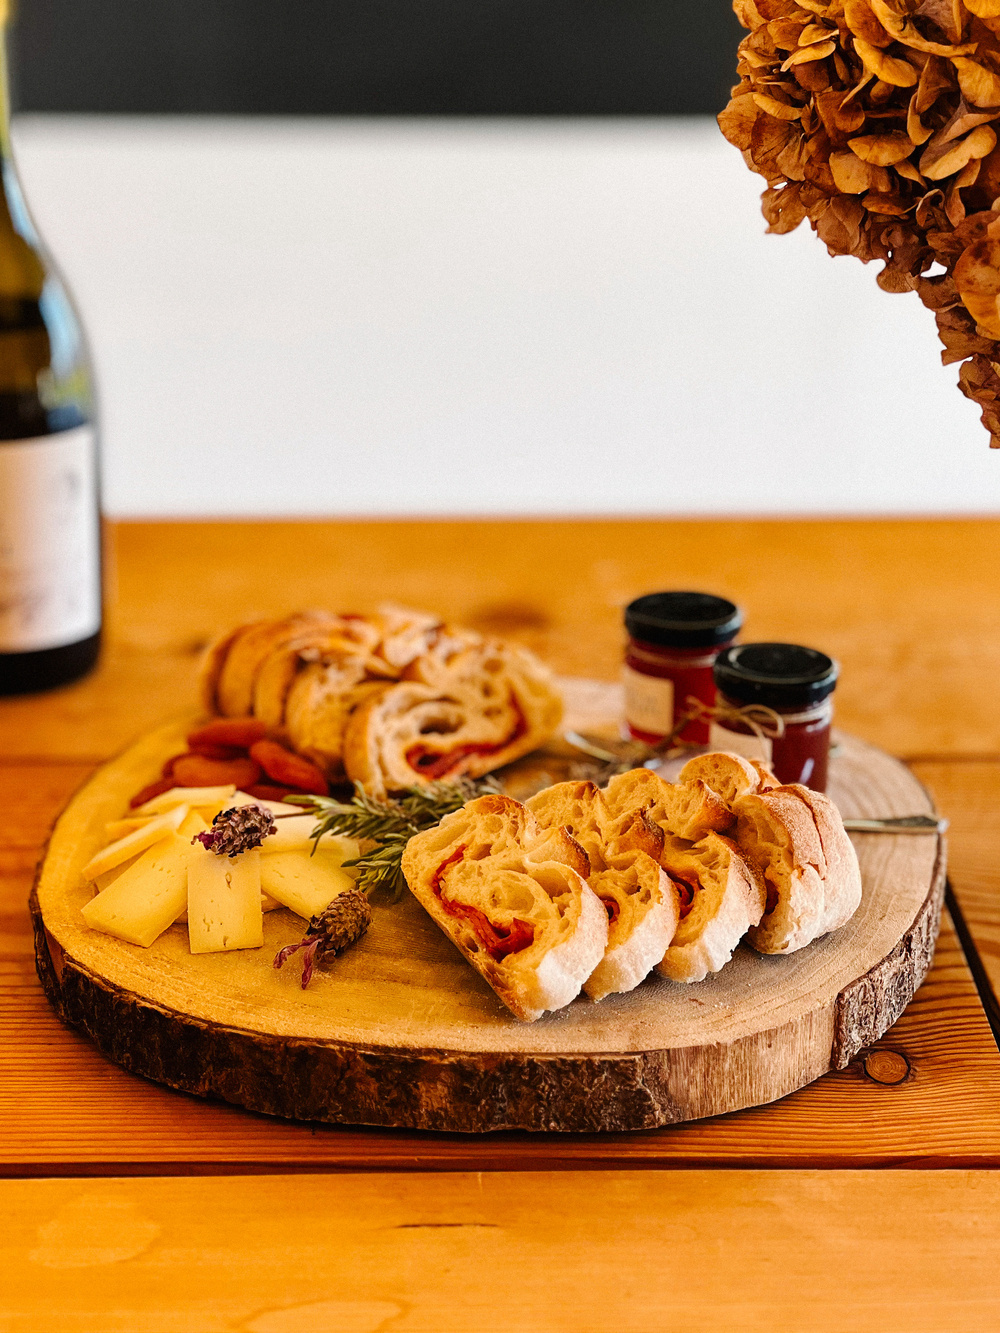 A cheese platter with sliced baguette, cheese, and condiments on a wooden board, with a bottle of wine and flowers in the background.